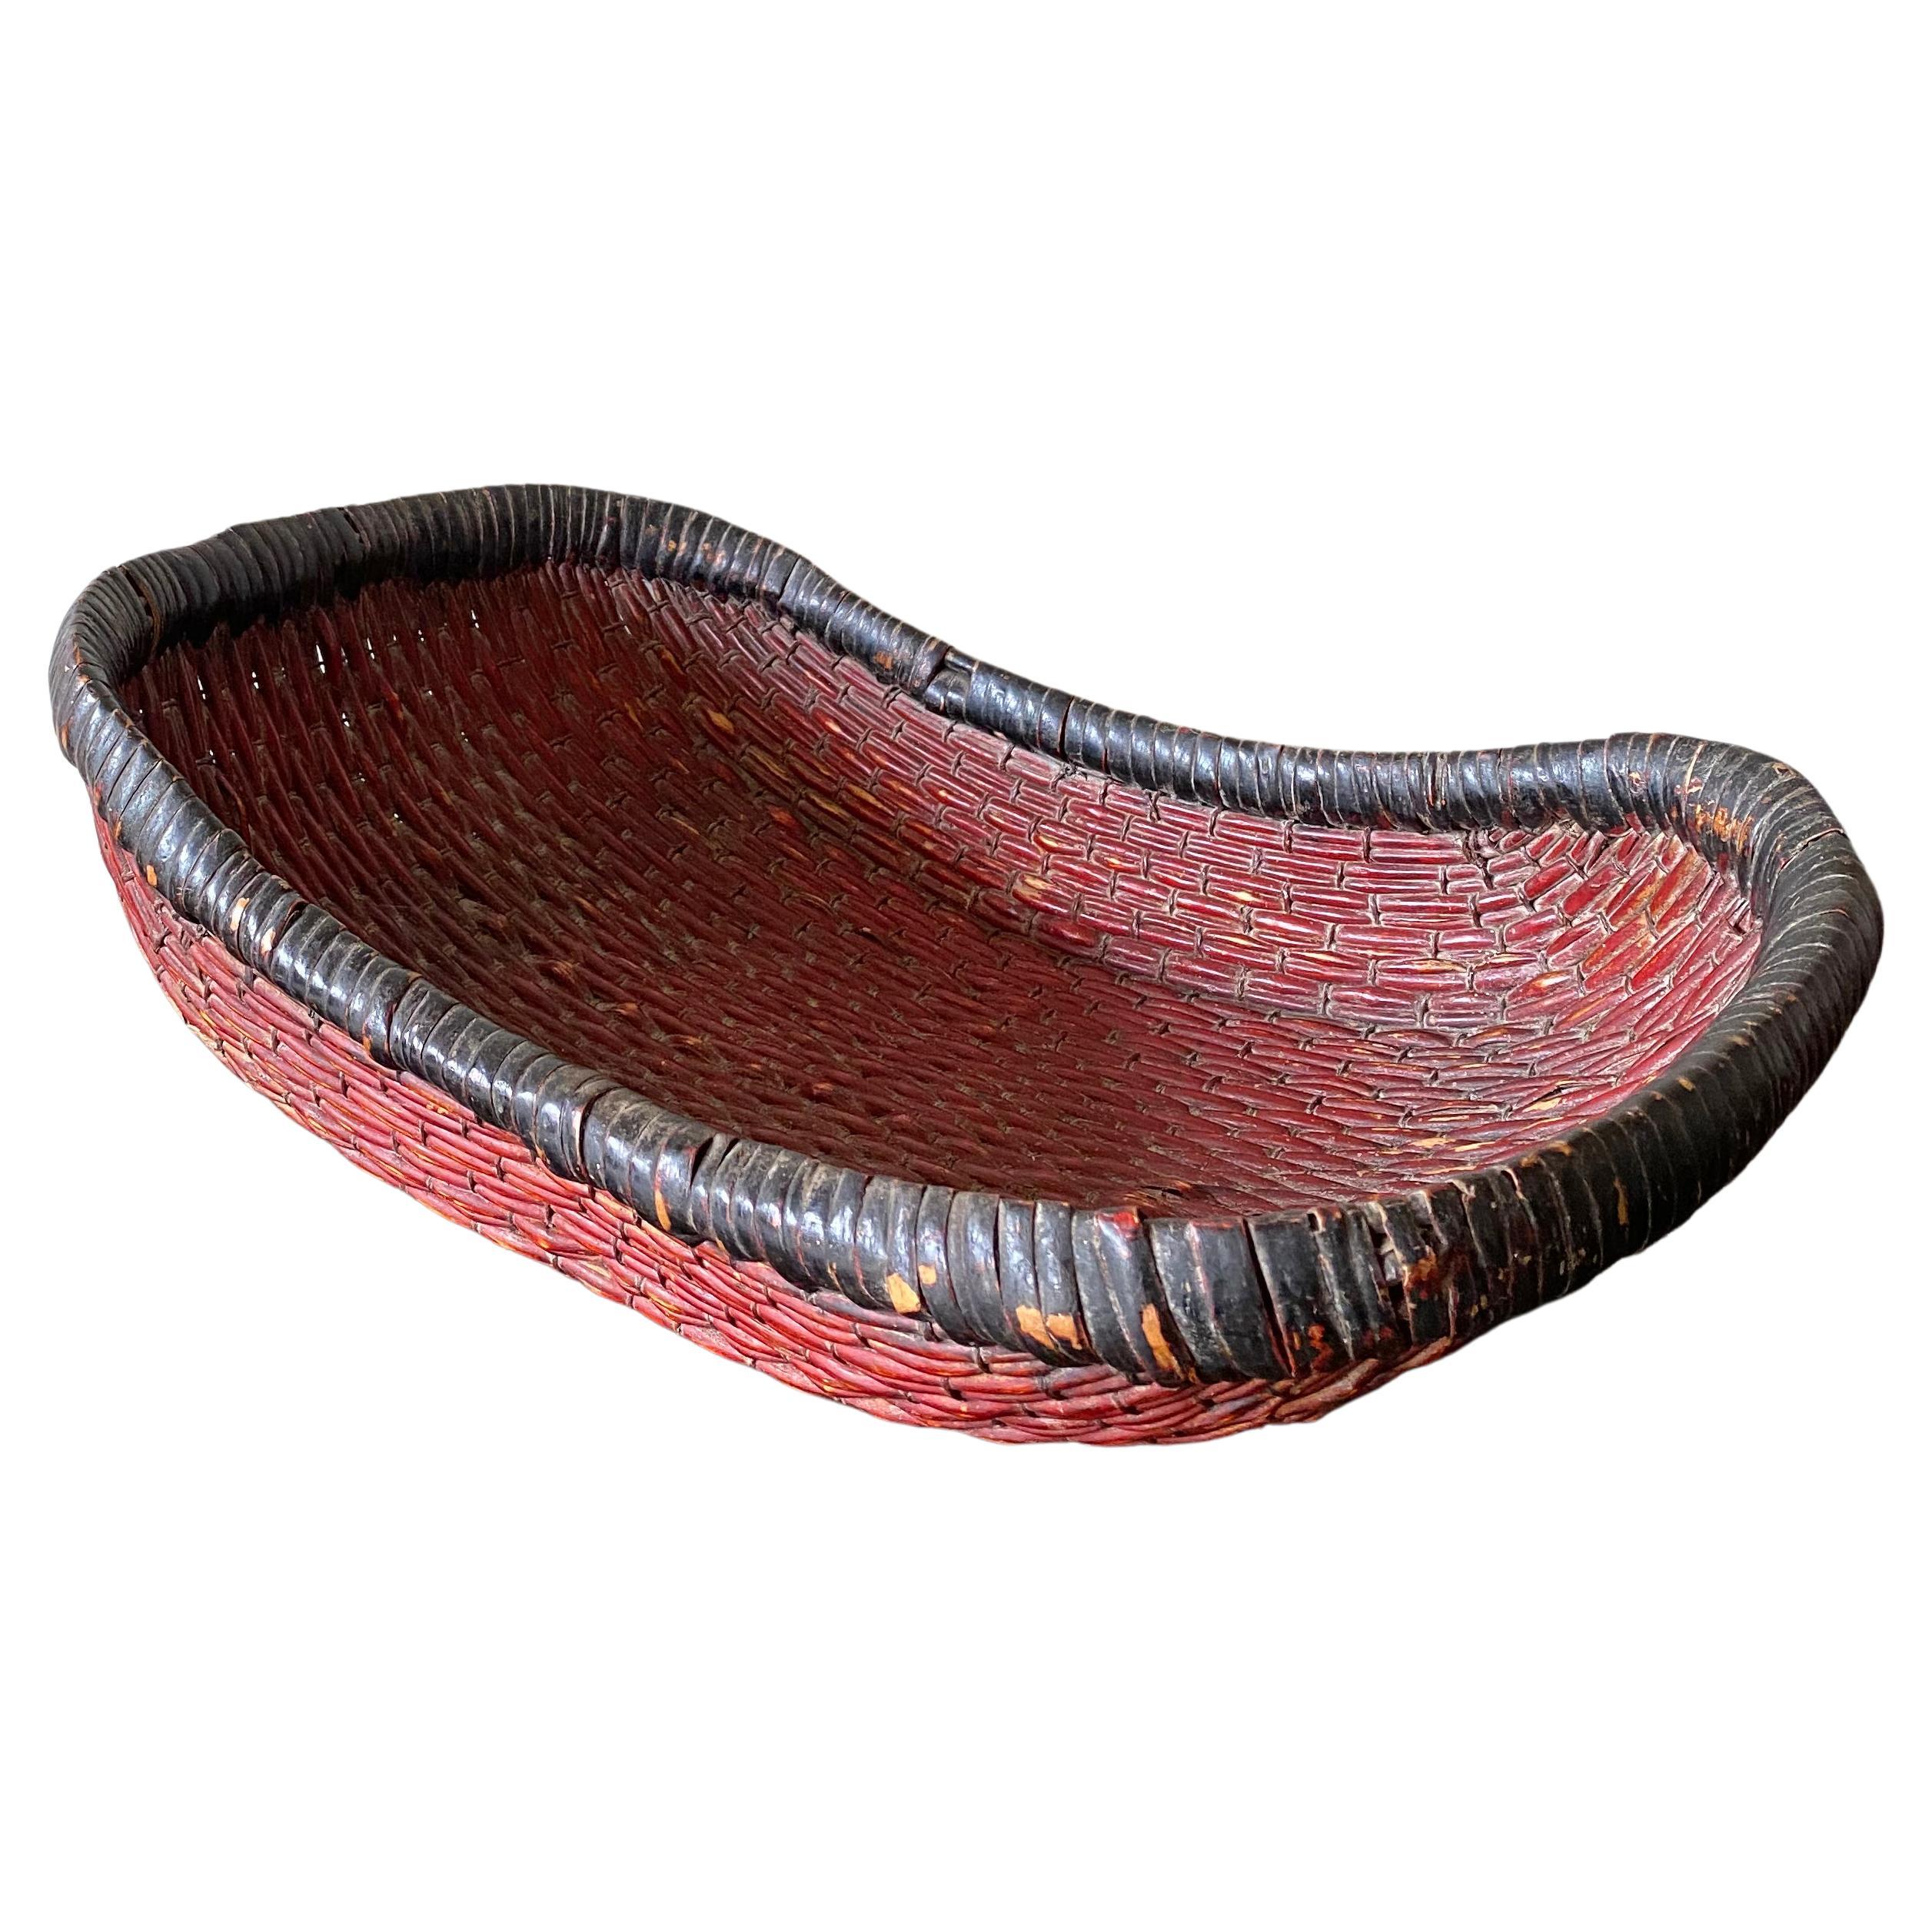 Chinese Red Painted Reed Basket, "Mantou" Basket, Early 20th Century For Sale